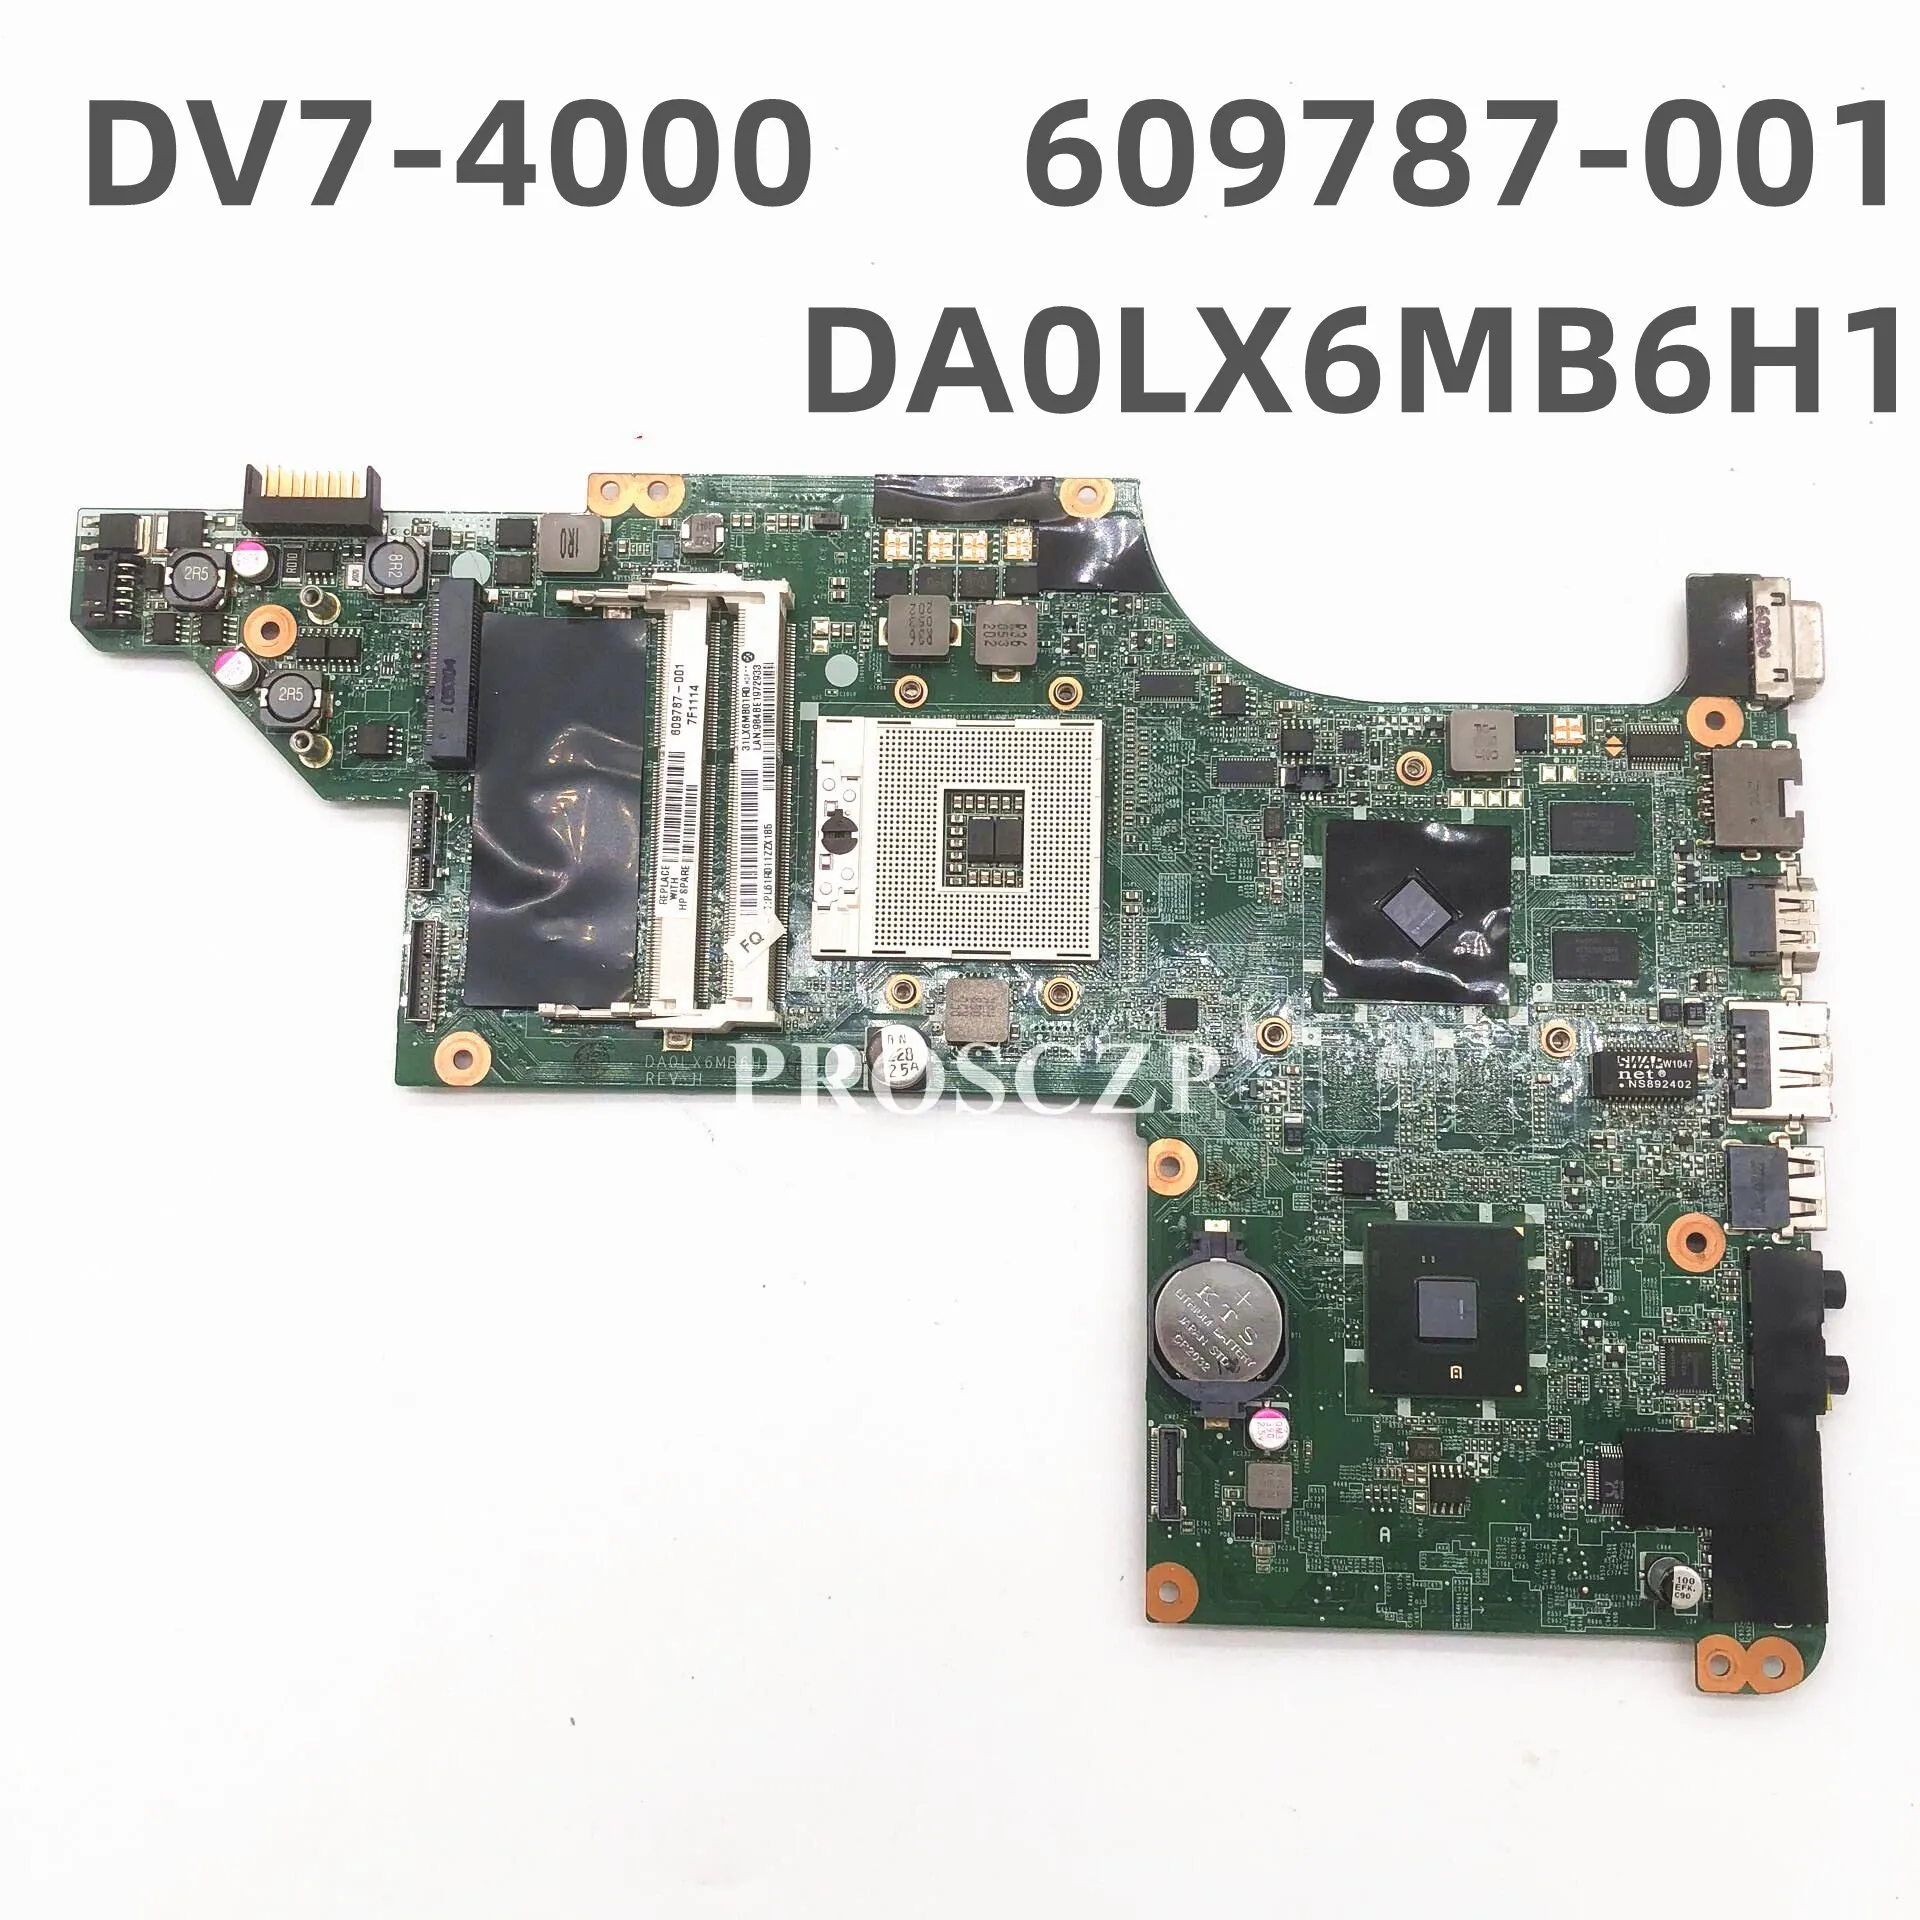 609787-001 609787-501 609787-601 High Quality For HP DV7-4000 Laptop Motherboard DA0LX6MB6H1 WIth HM55 216-0774007 GPU 100% Test